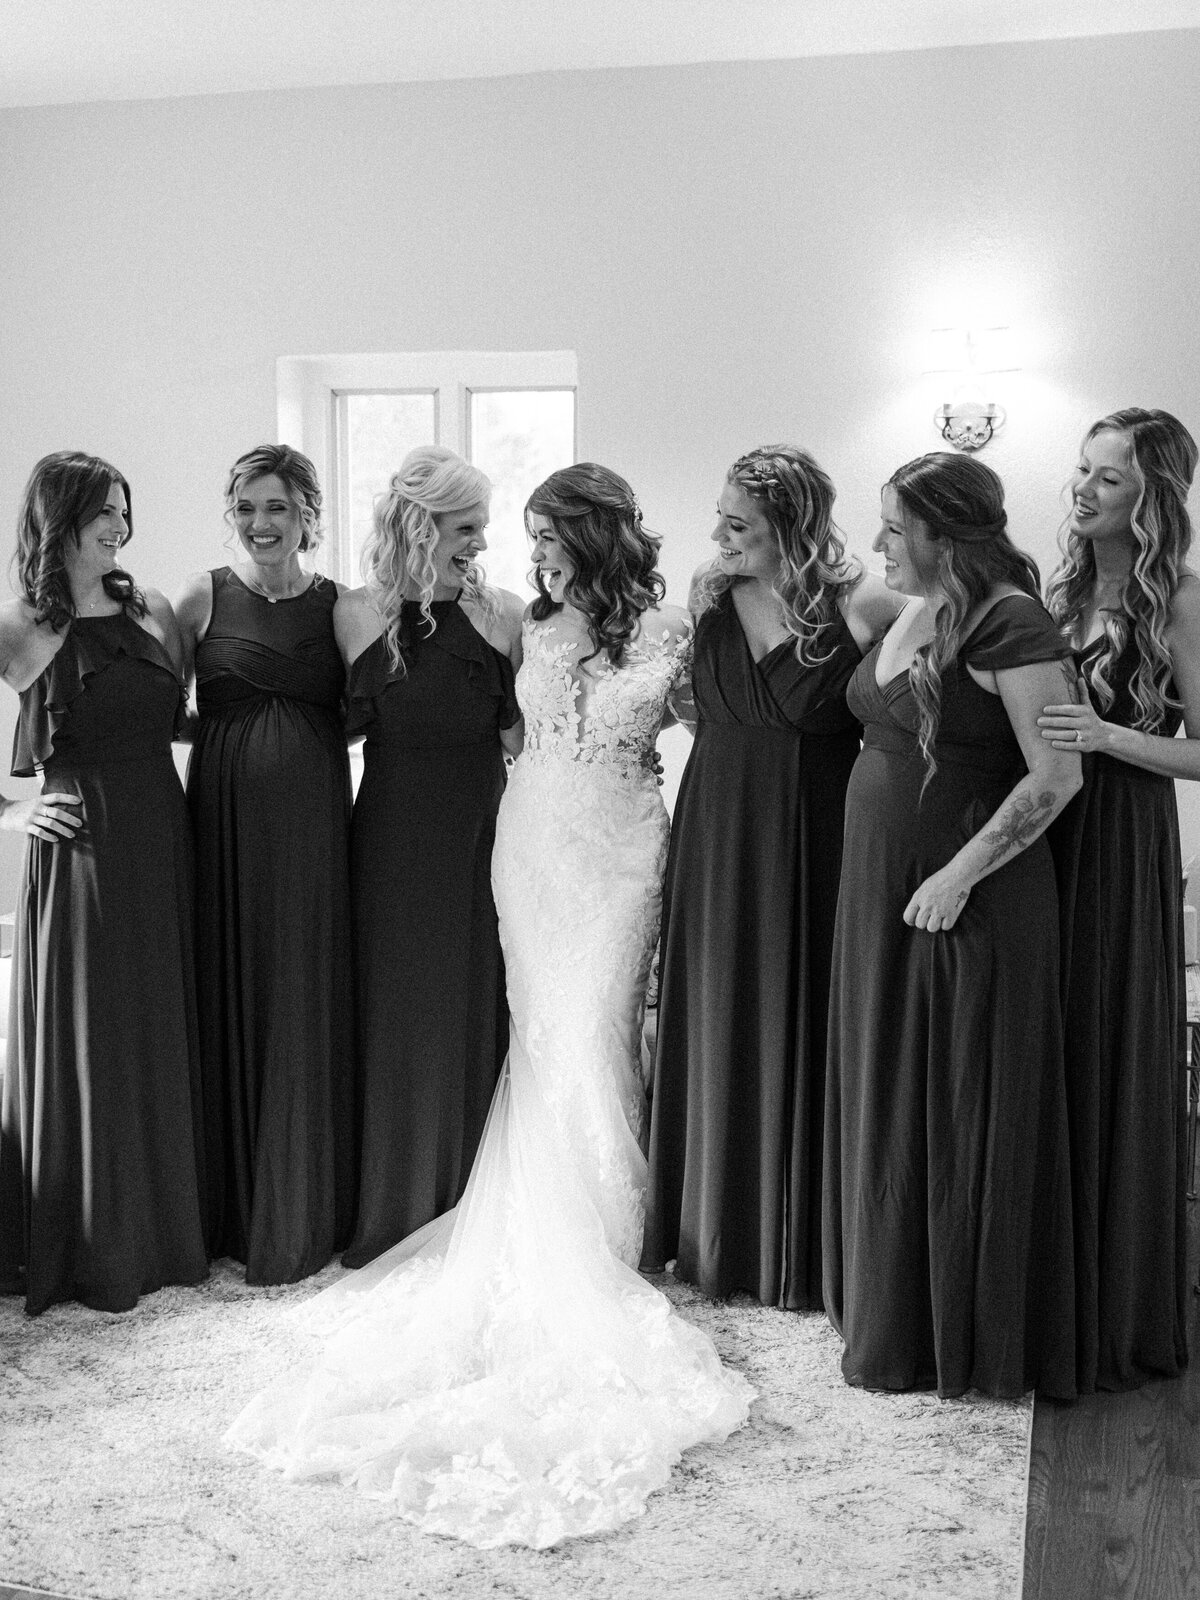 A bride standing arm in arm with her six bridesmaids